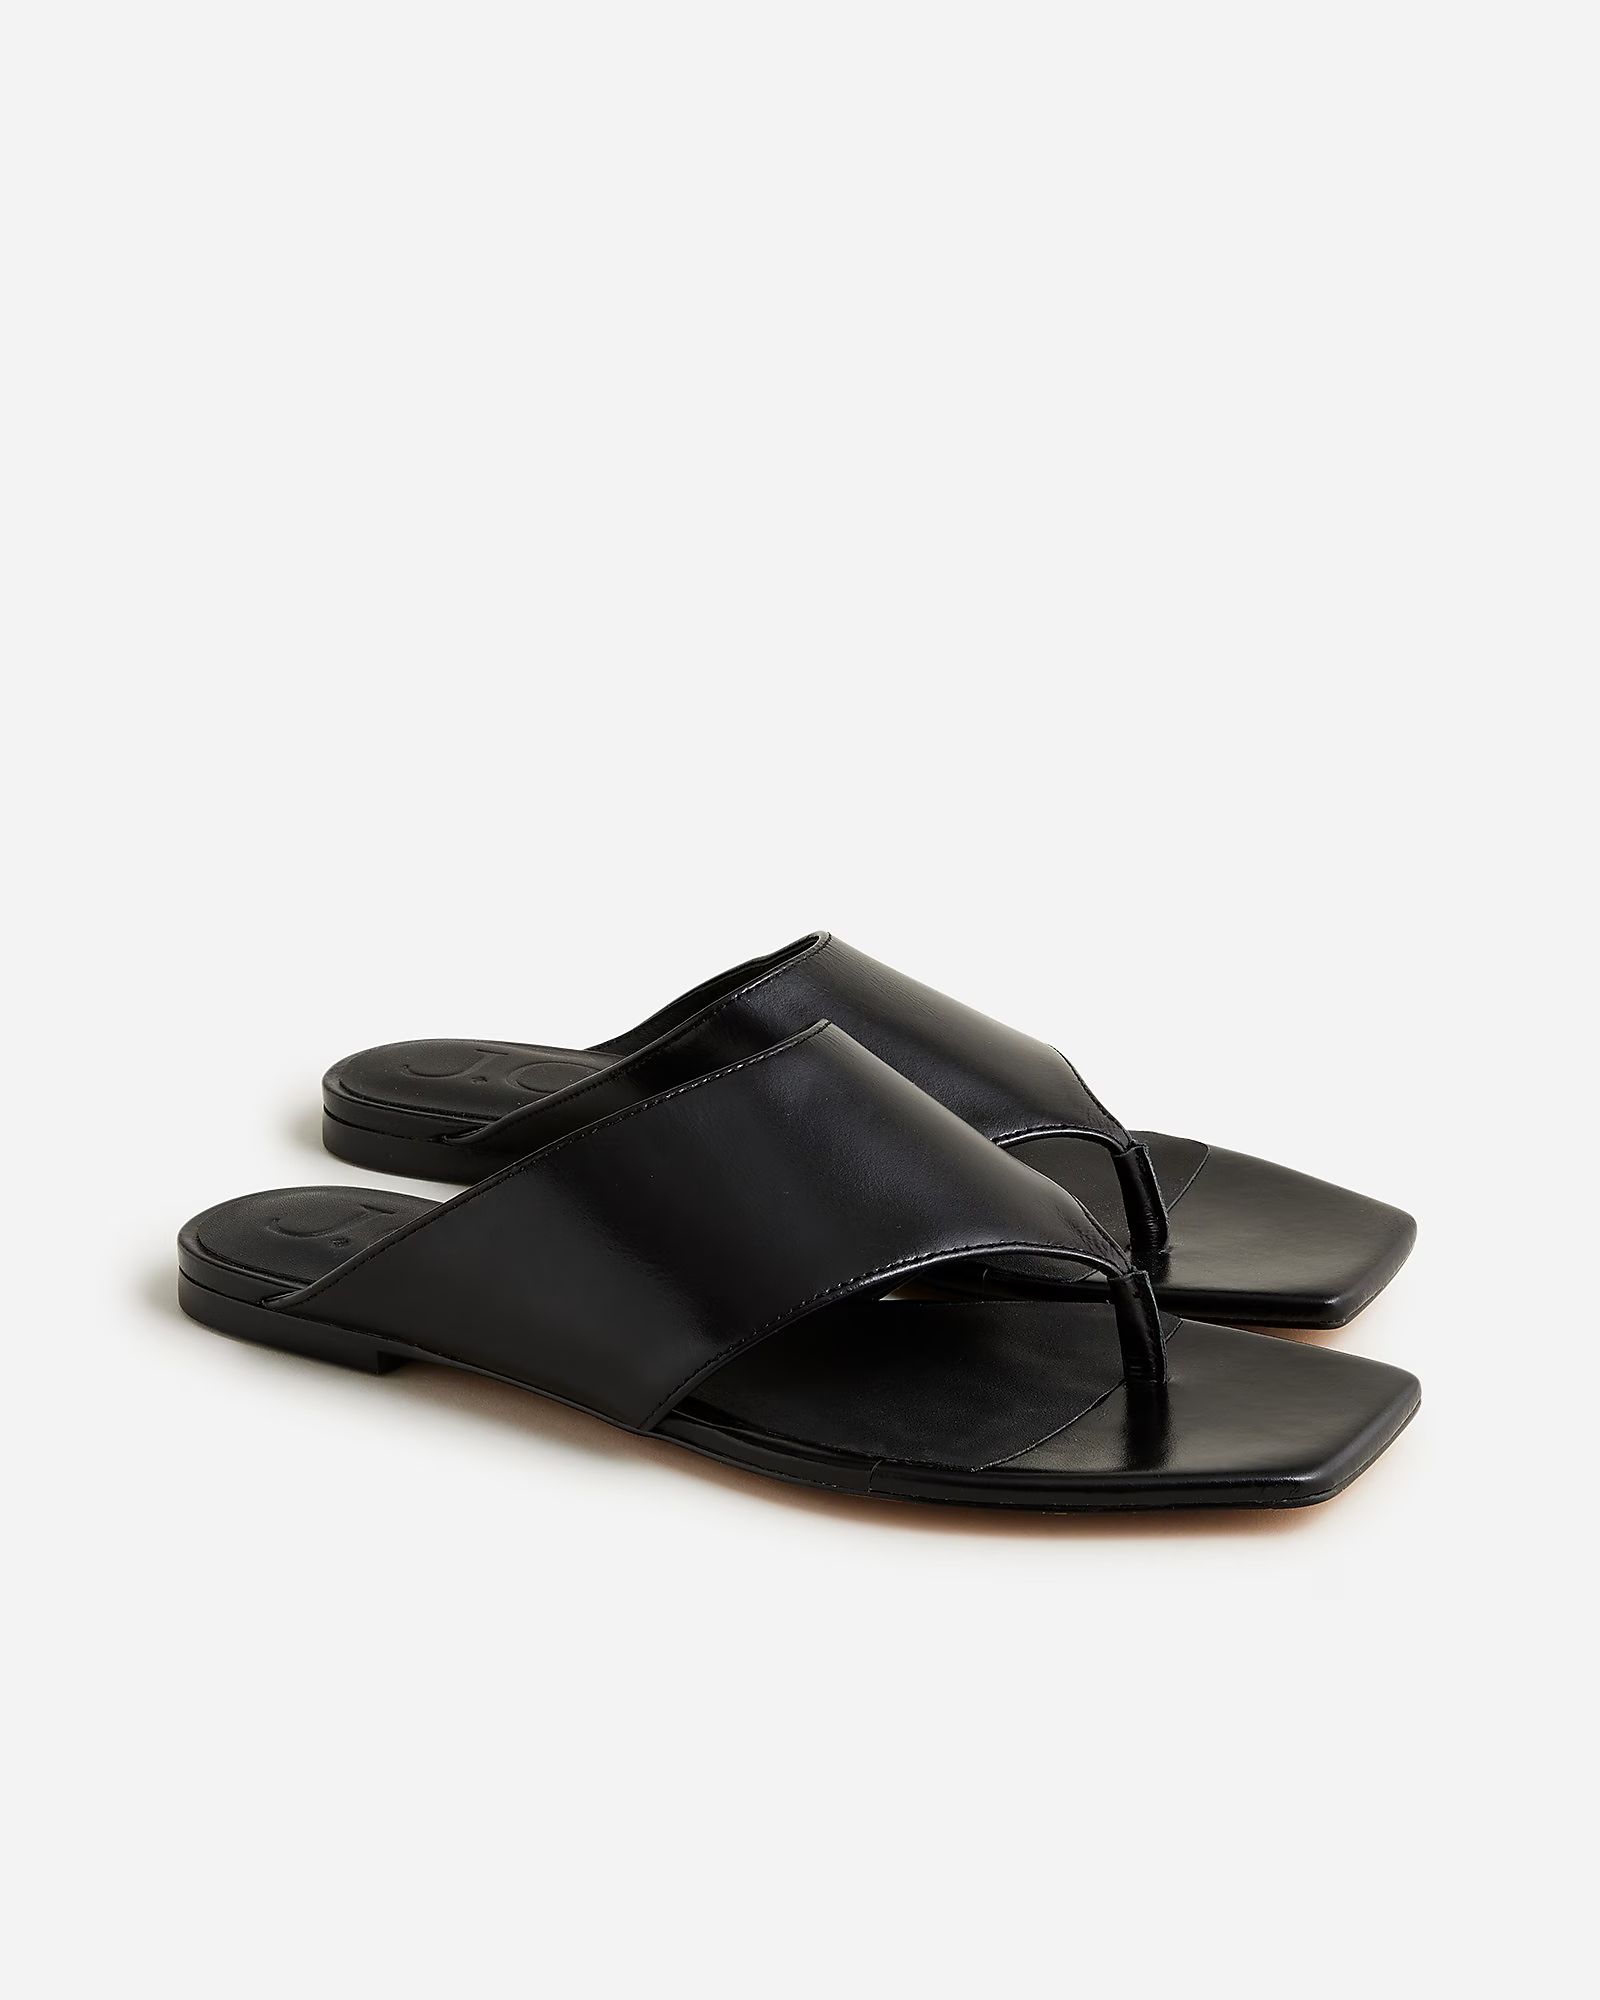 New Capri wide thong sandals in leather | J.Crew US